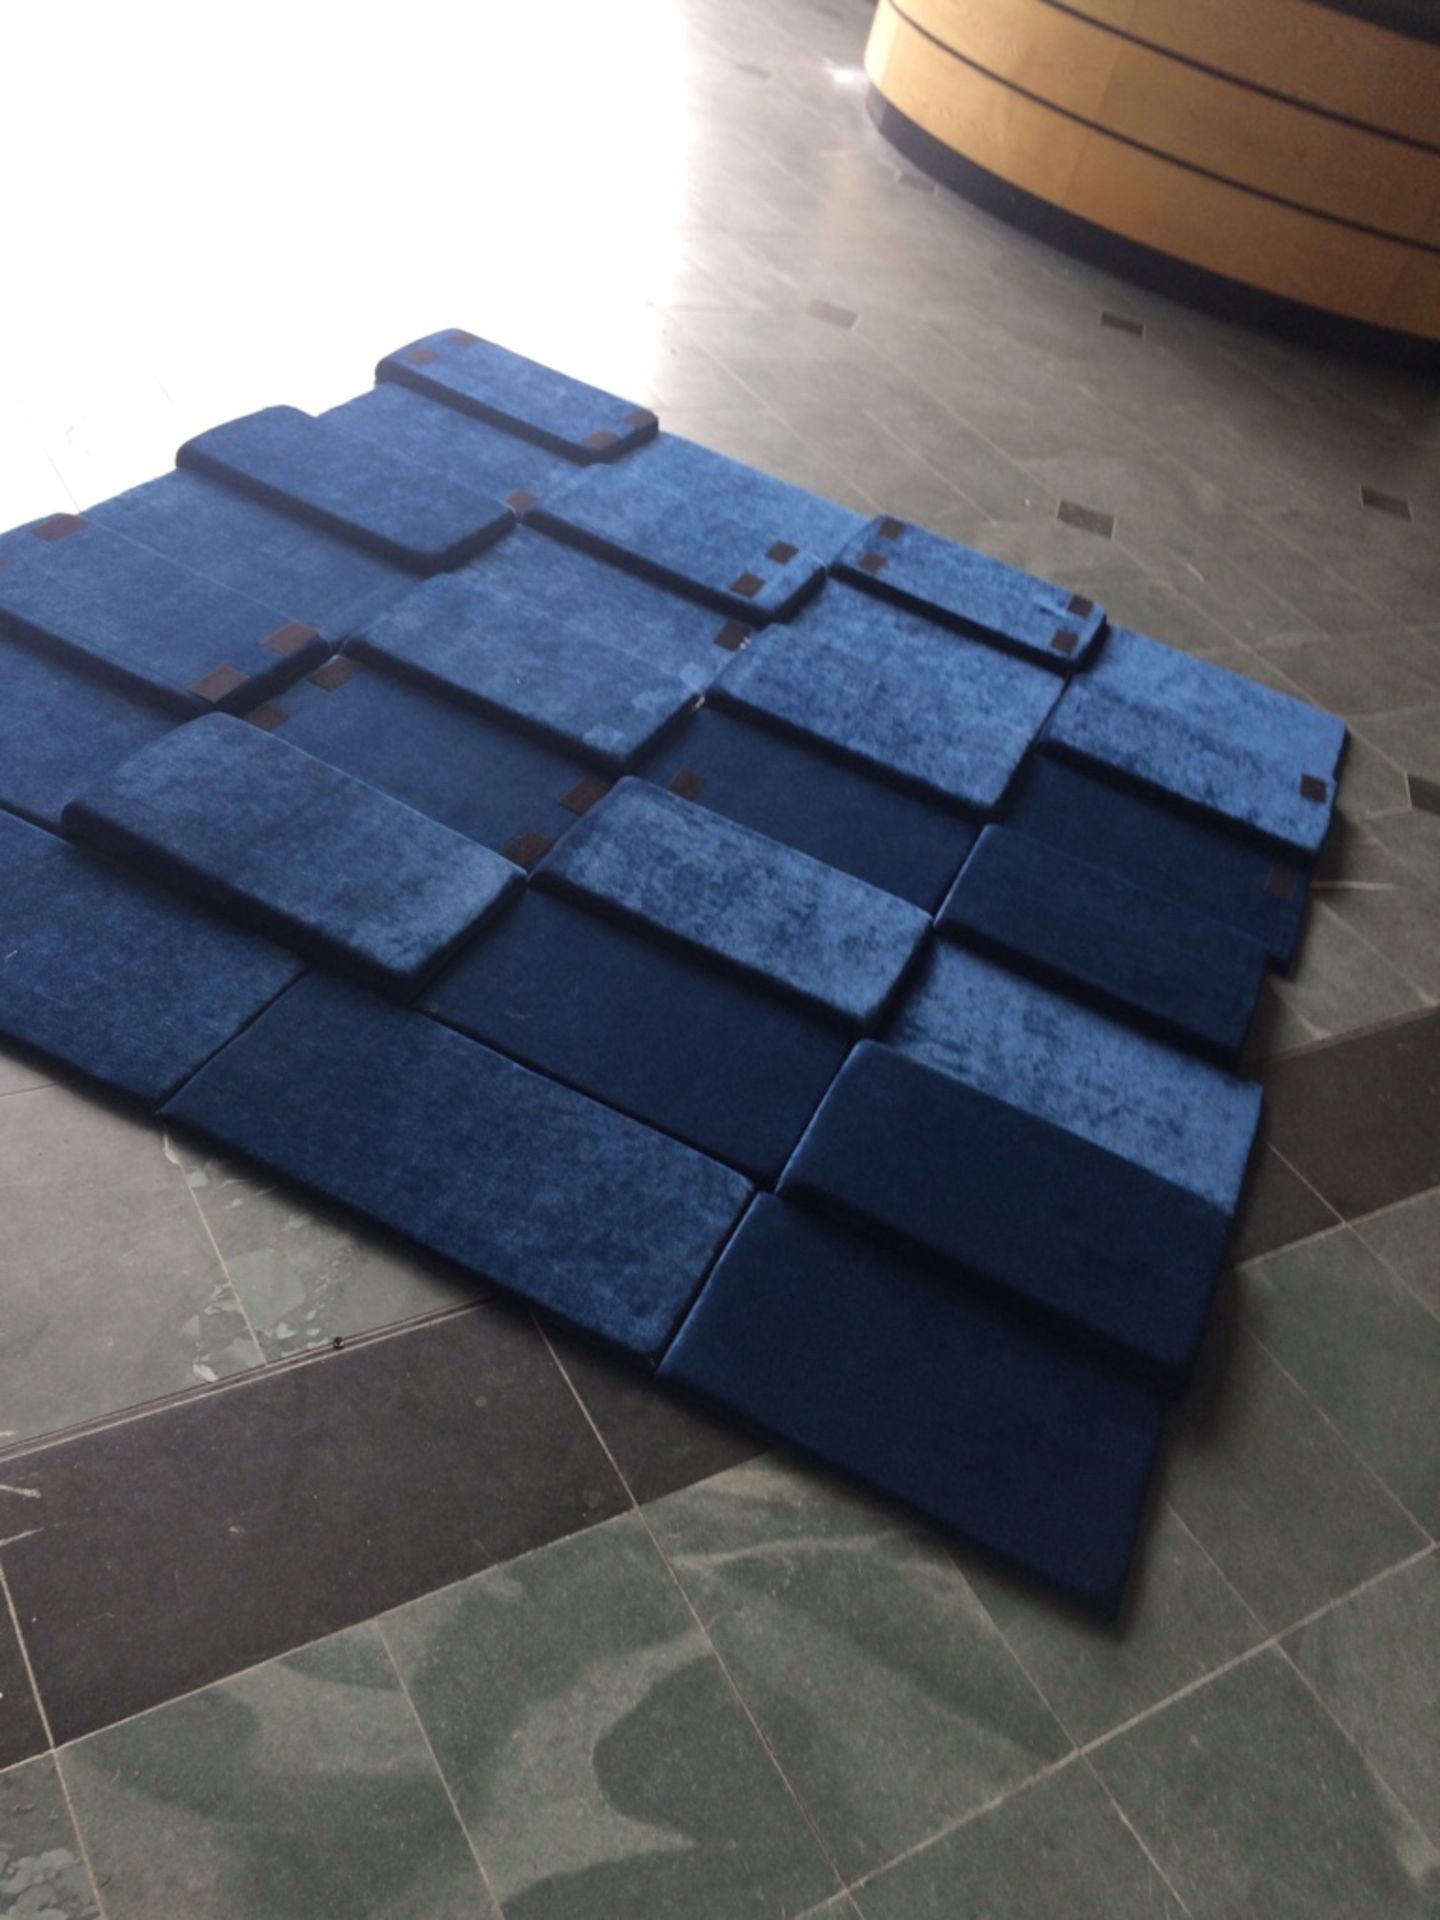 Velvet Wall Cladding Panels Previously Used On Entrance Hall Feature Wall Velcro Fixes To Any Wall - Image 2 of 5